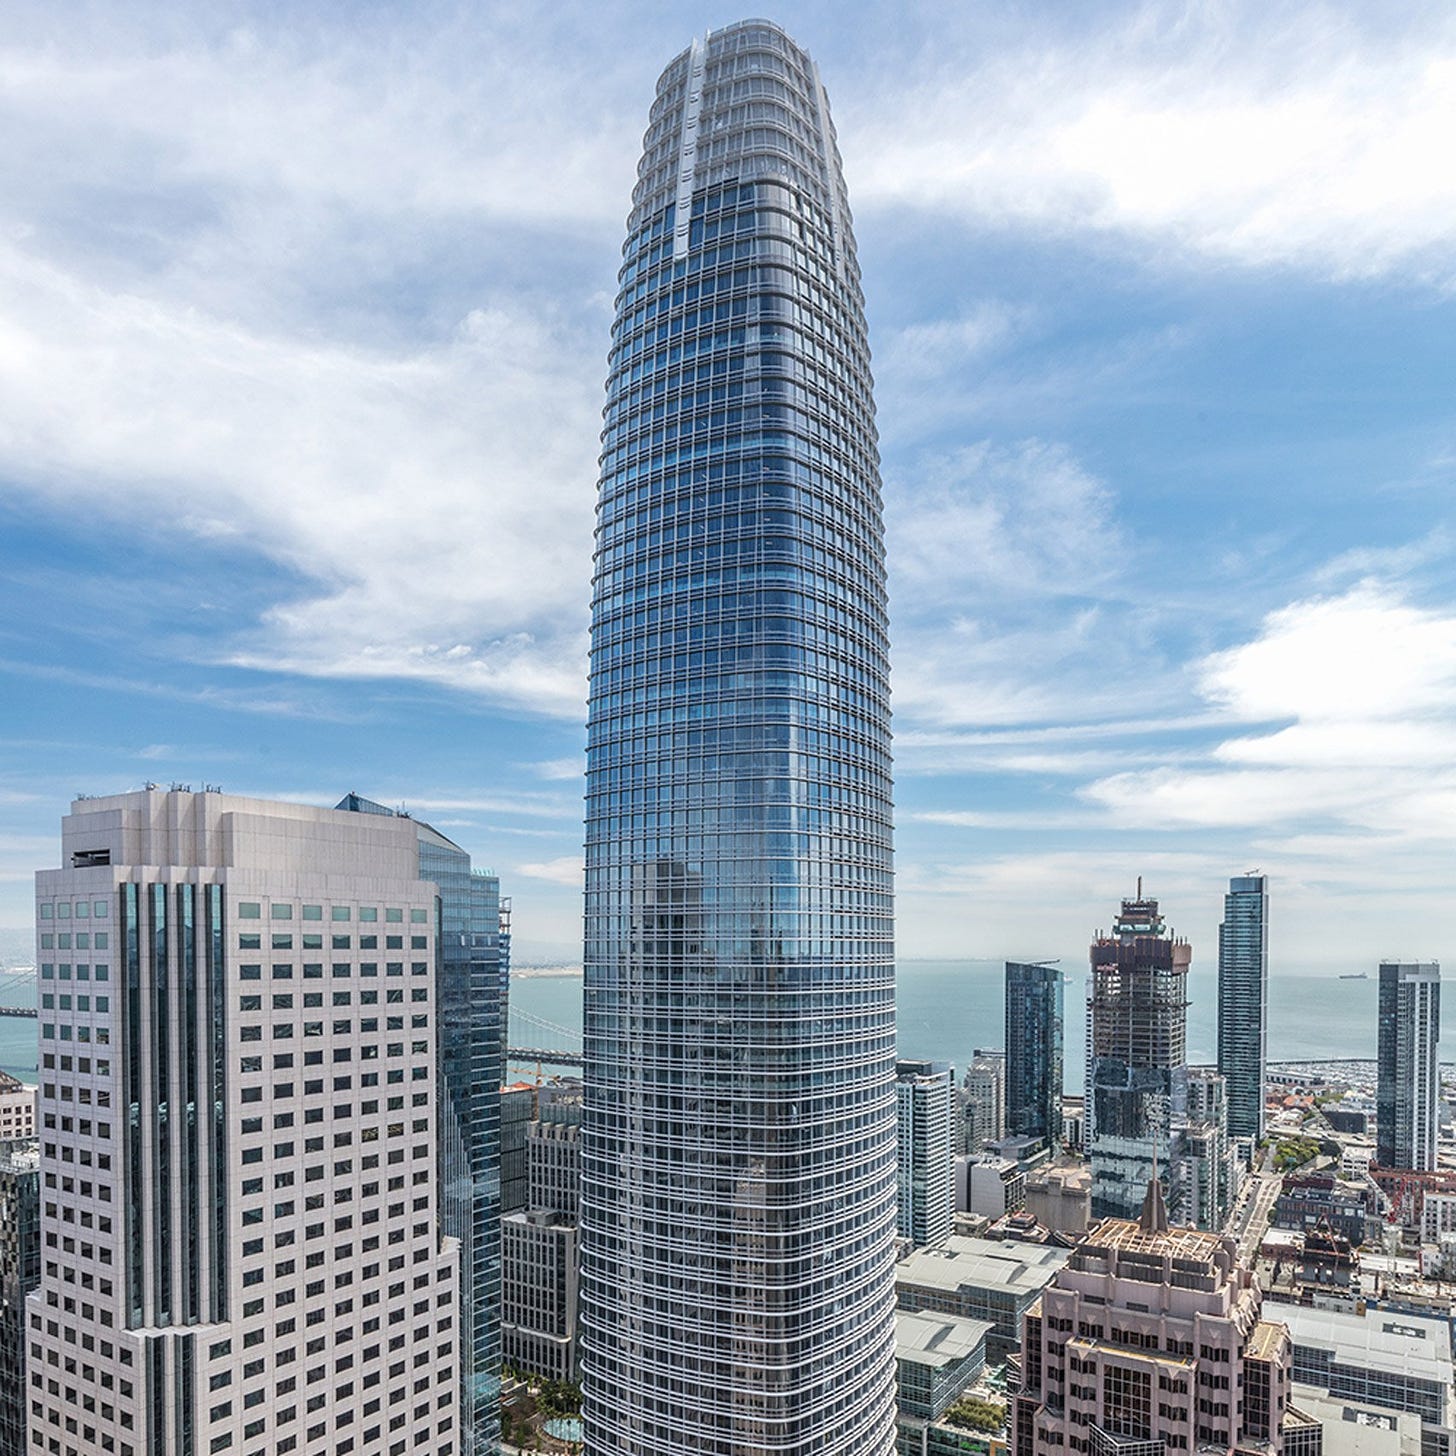 San Francisco's Salesforce Tower is named world's "best tall building"